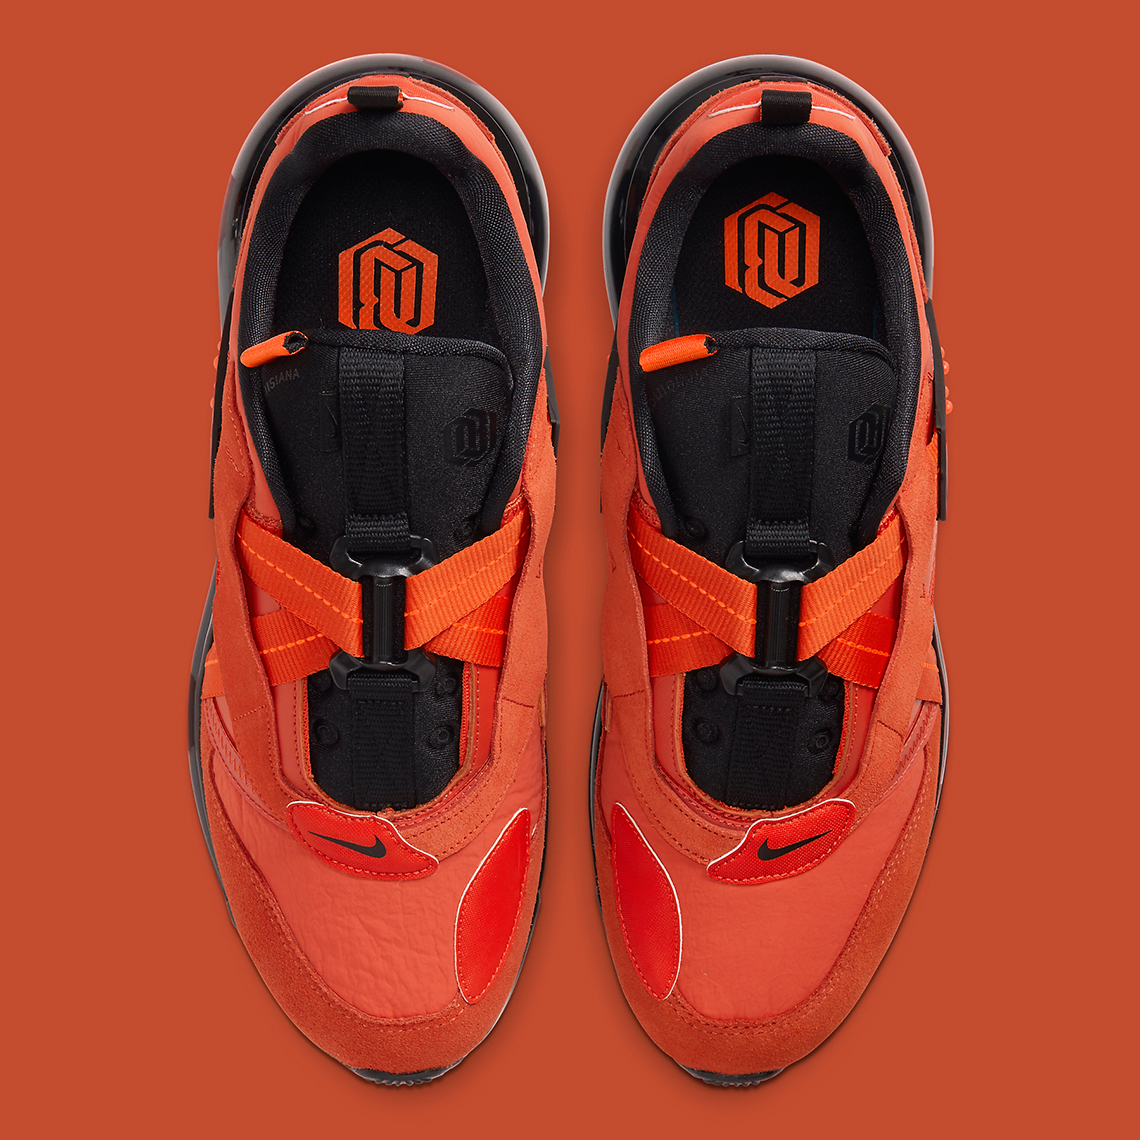 OBJ's Nike Air Max 720 Slip Coming In &quot;Browns&quot; Colorway: Photos